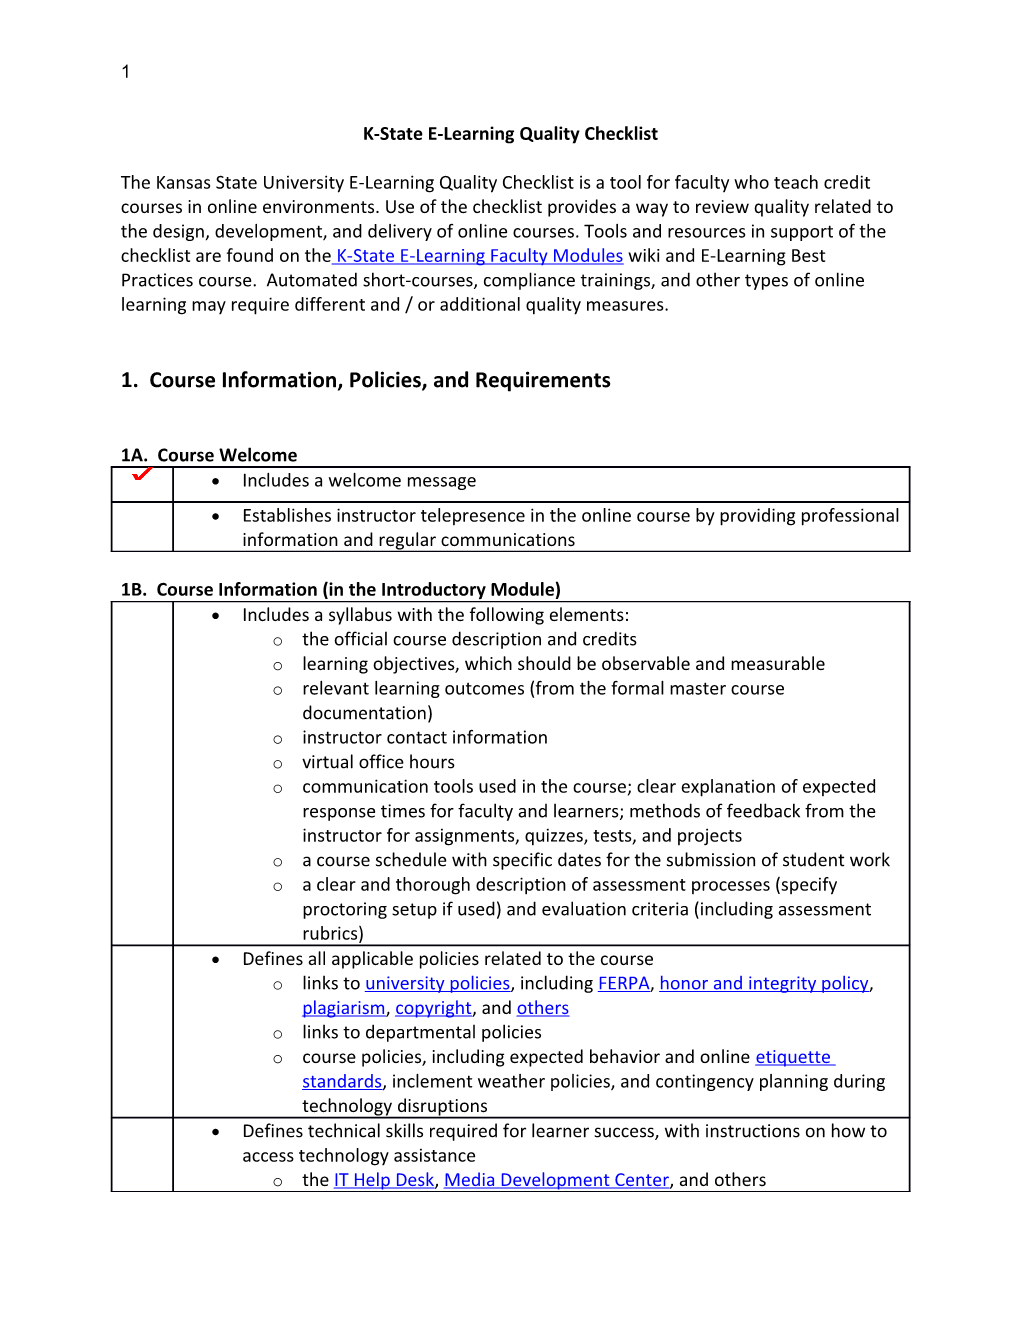 K-State Quality E-Learning Checklist Google Doc